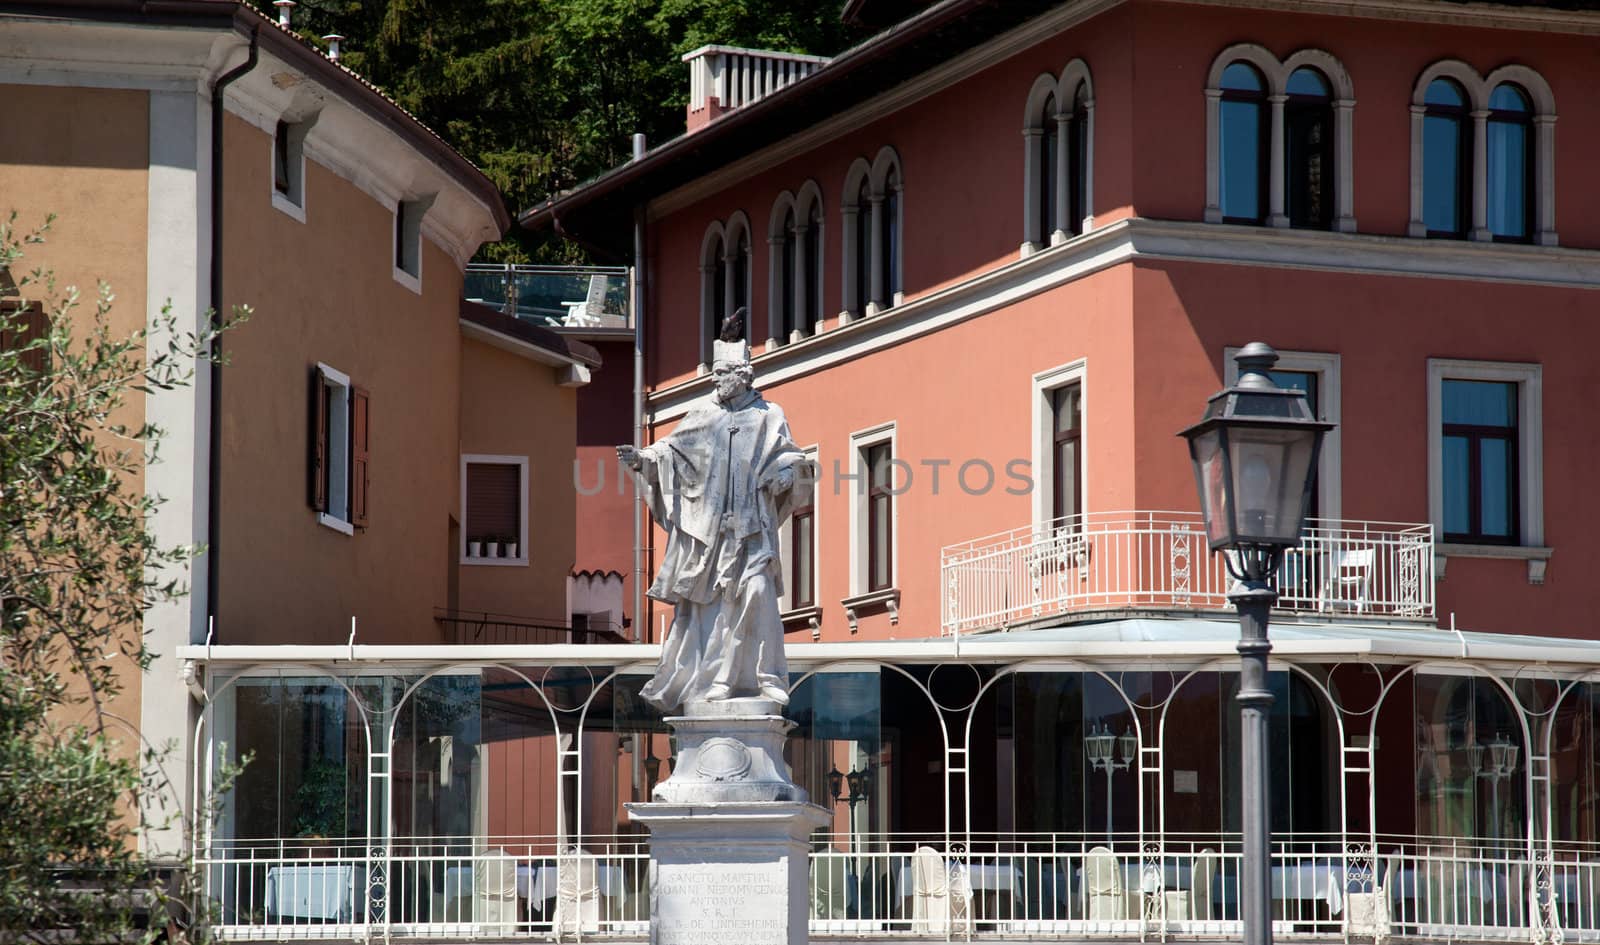 Statue in Riva by steheap